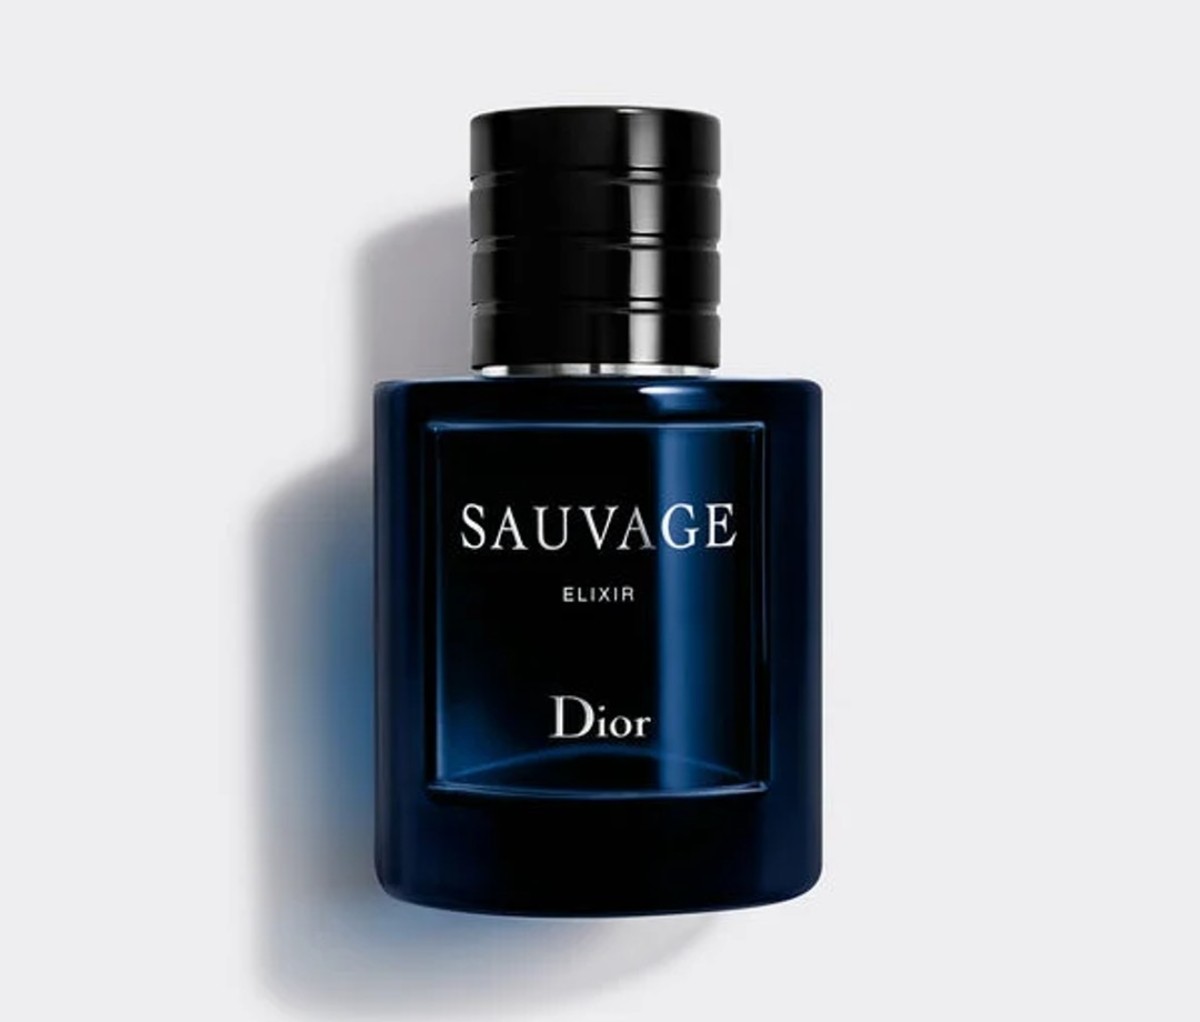 The 26 Best Smelling Colognes For Men to Try in 2023